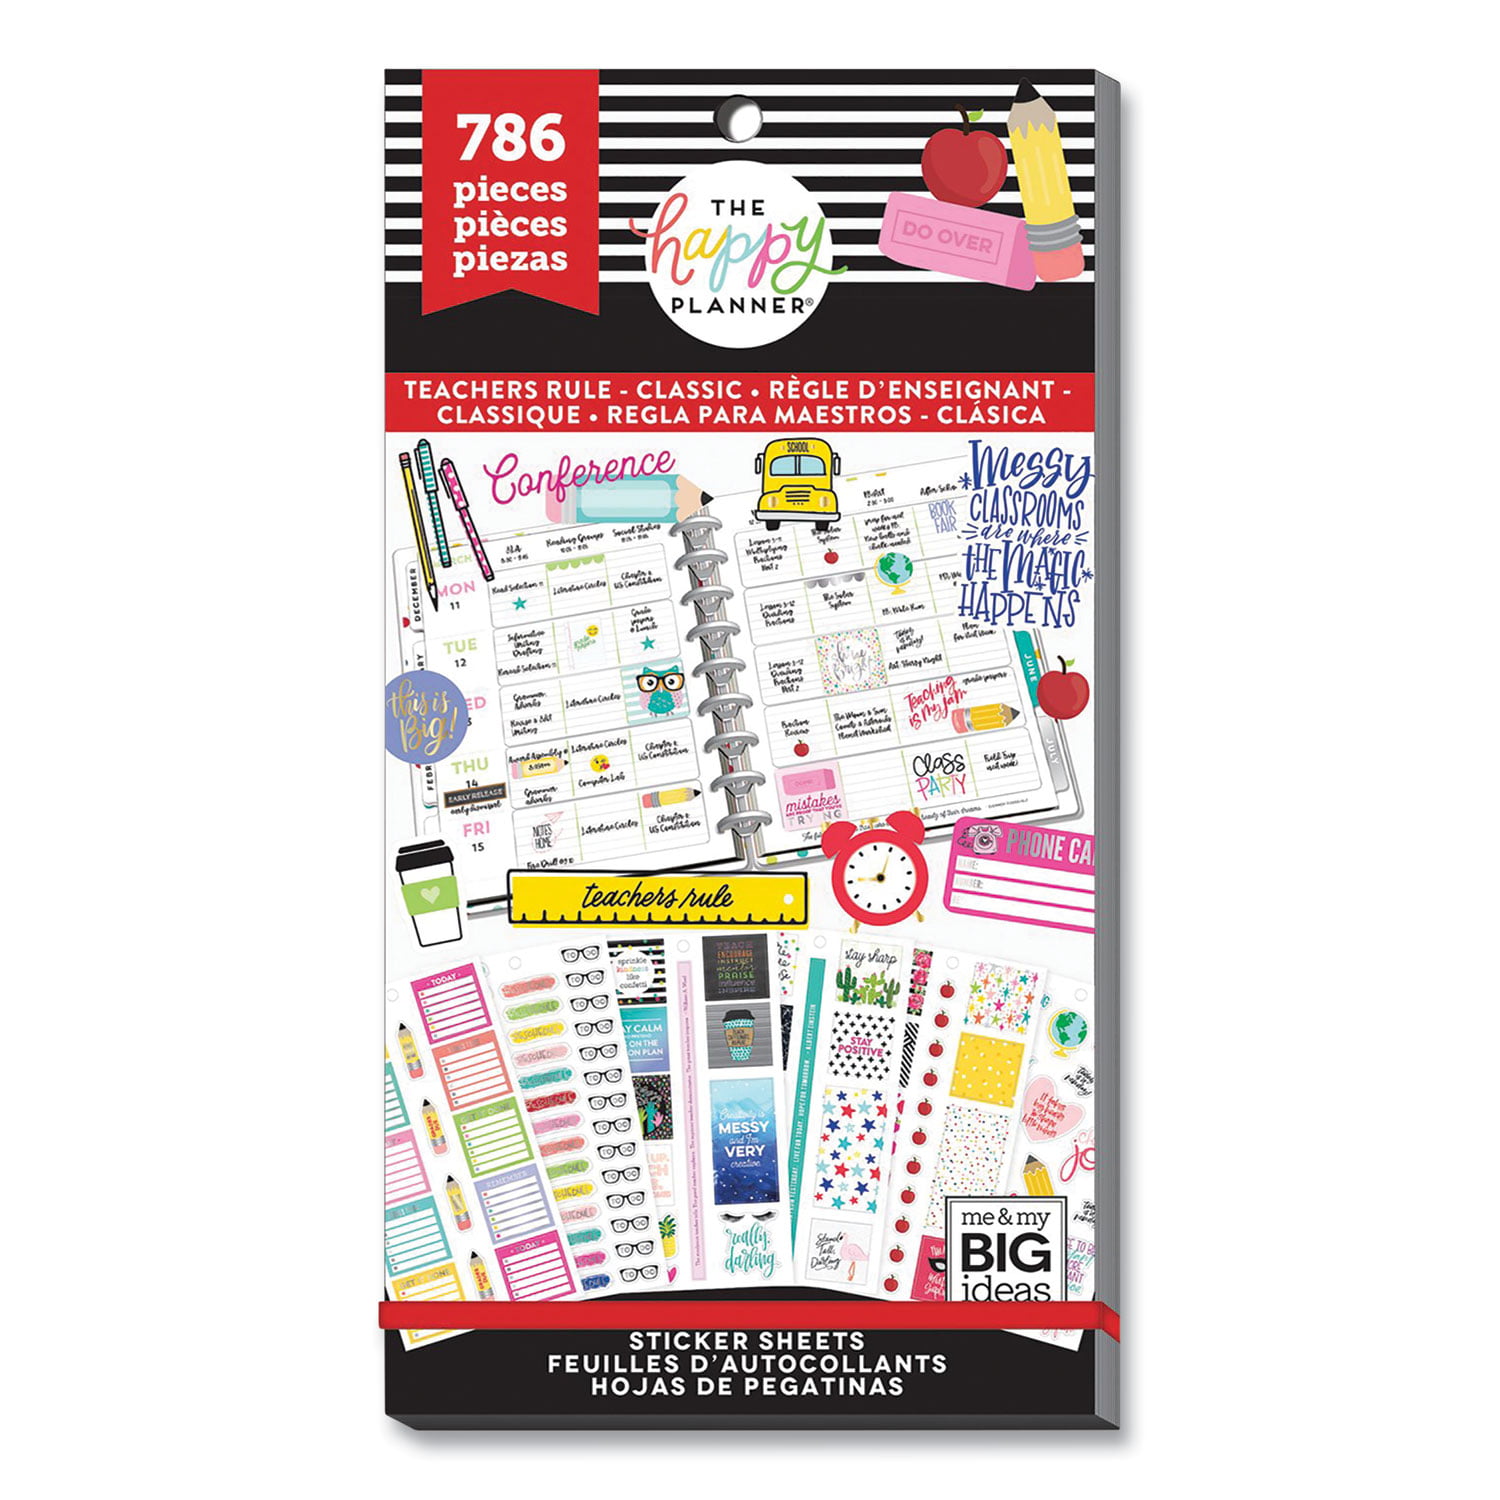 Stickers to help organize and accessorize your planner Glitter Social Media Icon Stickers